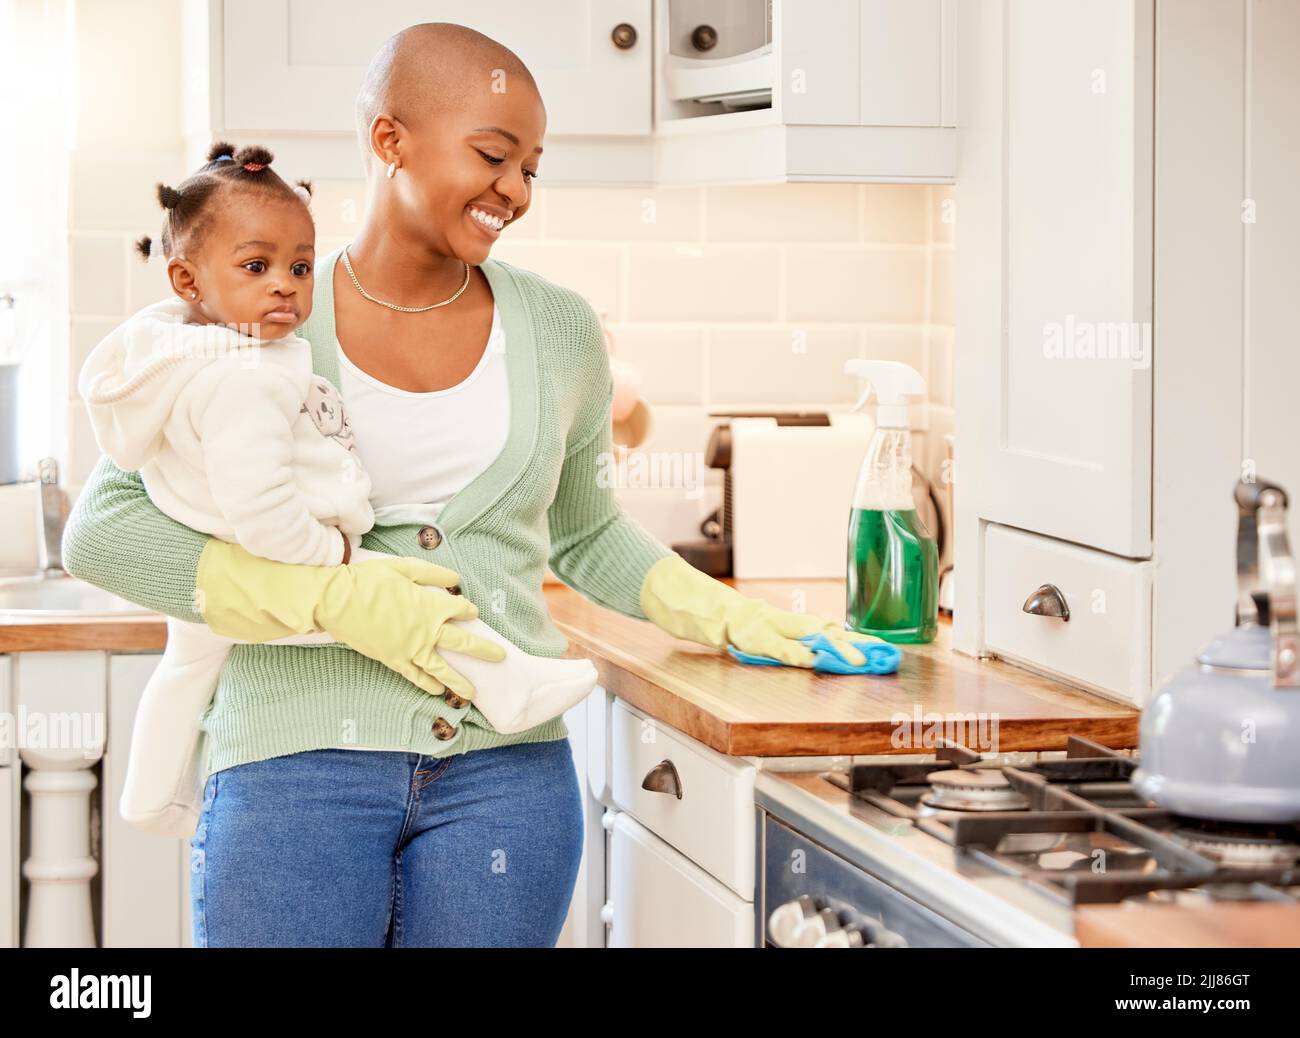 Its chore day. an attractive young woman carrying her daugher while doing chores at home. Stock Photo